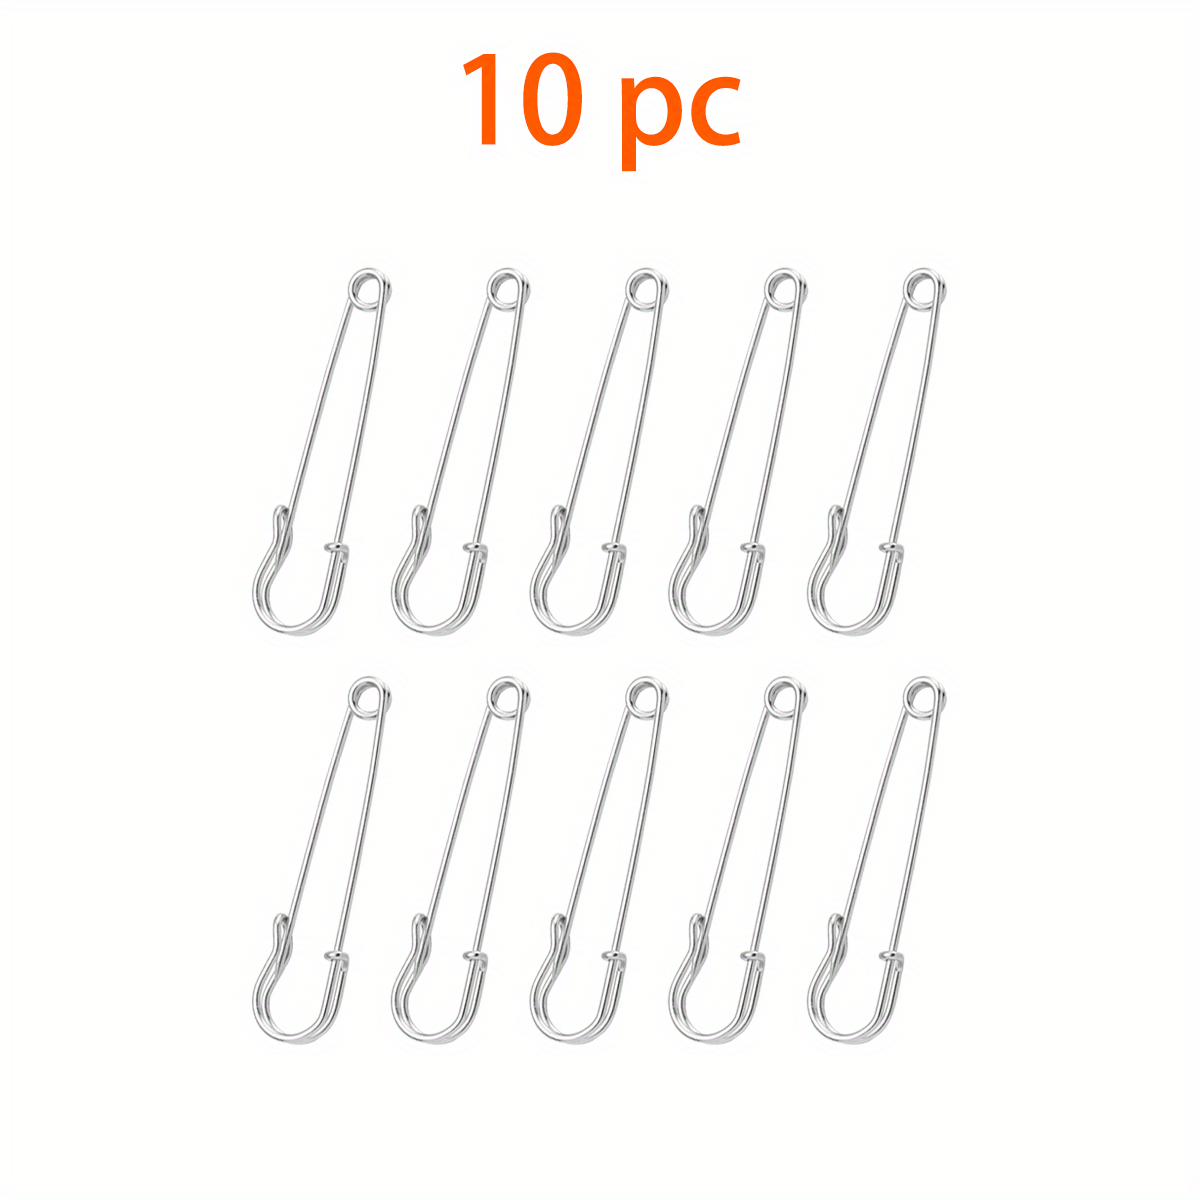 12pcs Large Heavy Duty Stainless Steel Big Jumbo Safety Pin Blanket Crafting